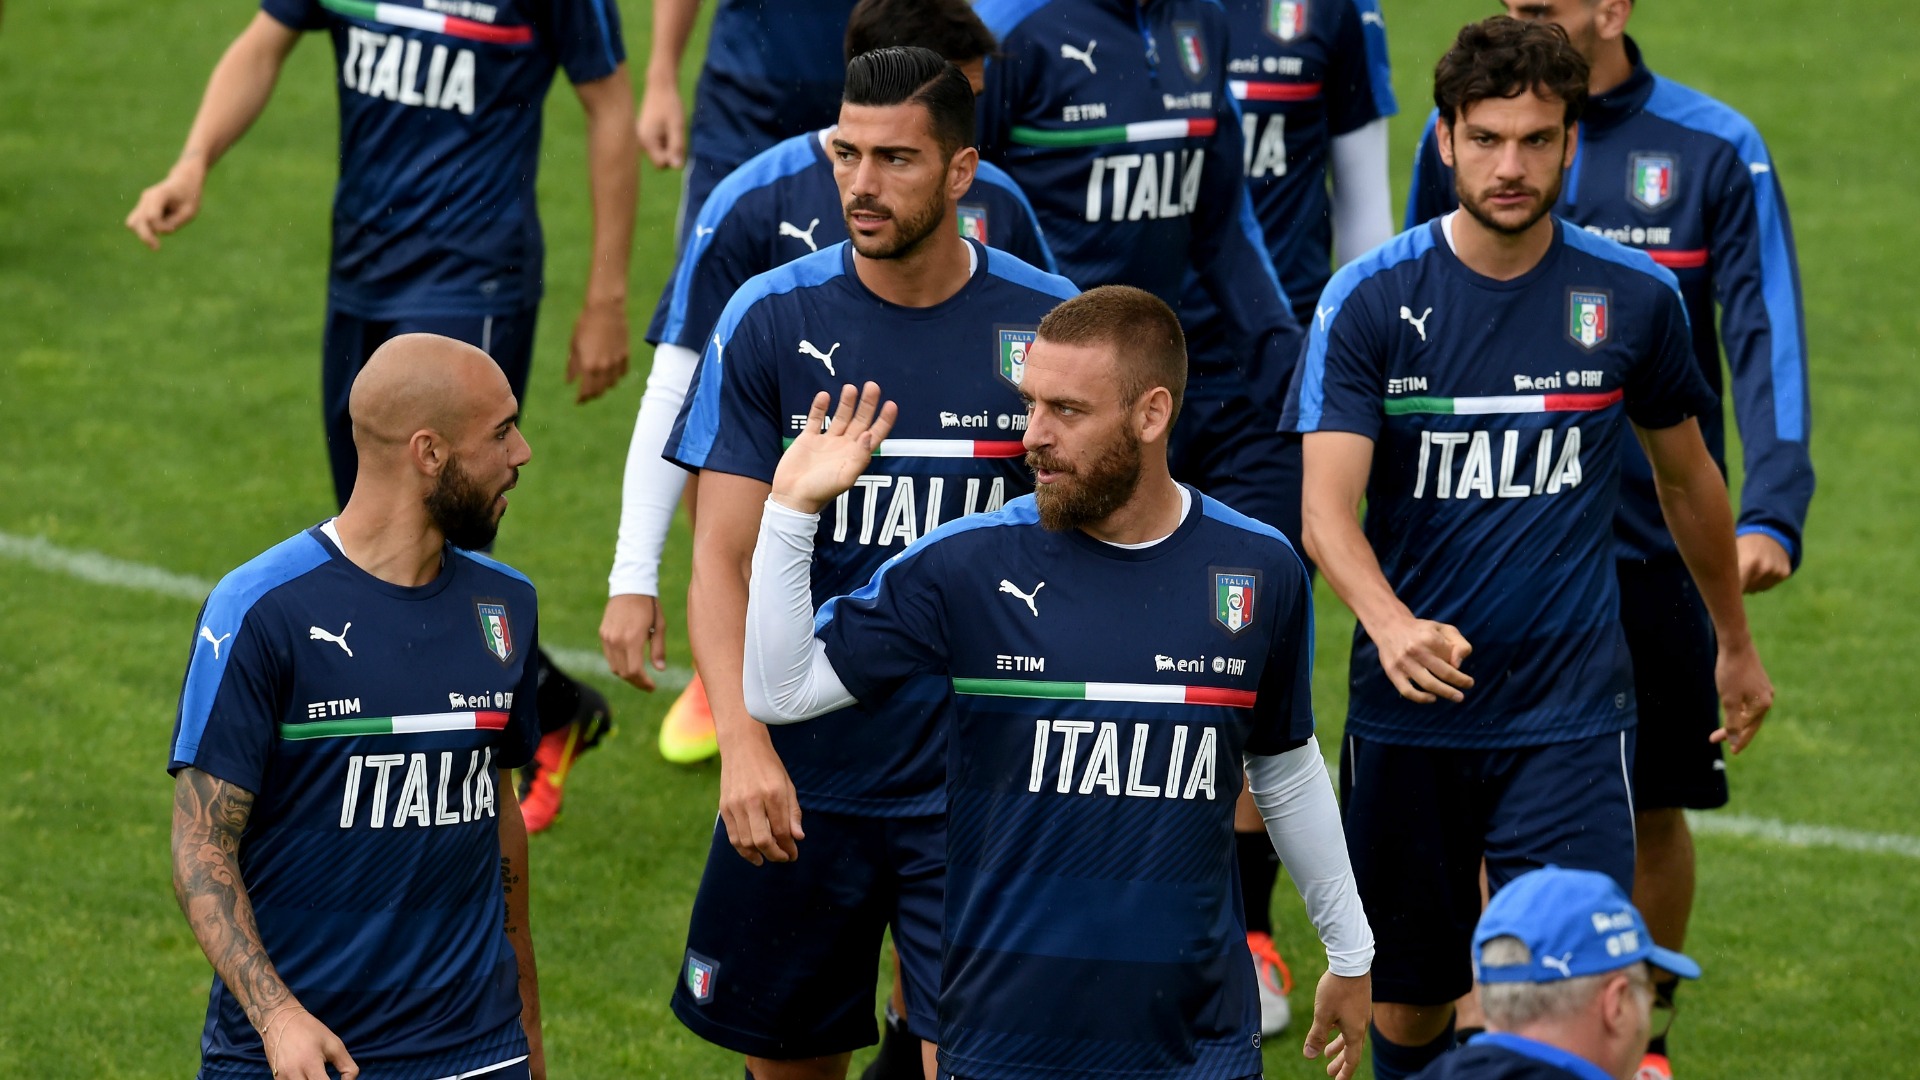 Italy sail past Greece to stay top in Euro 2020 qualifying group